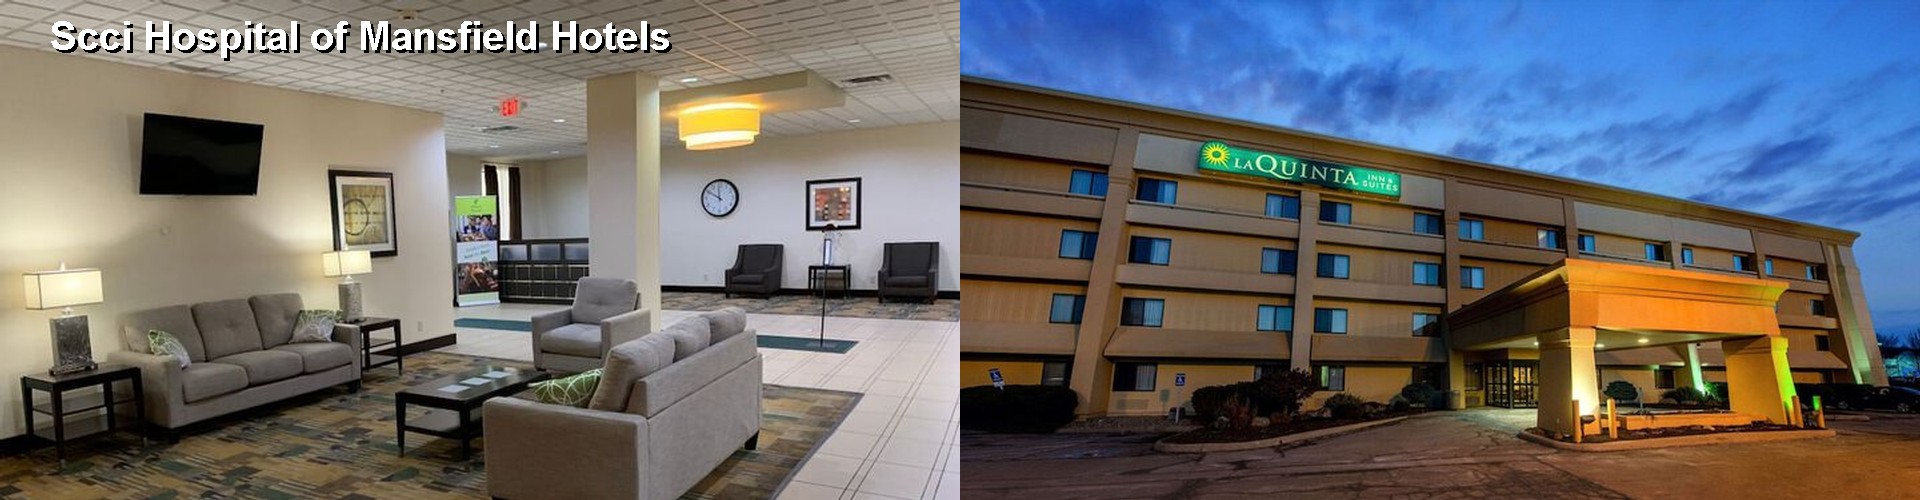 3 Best Hotels near Scci Hospital of Mansfield